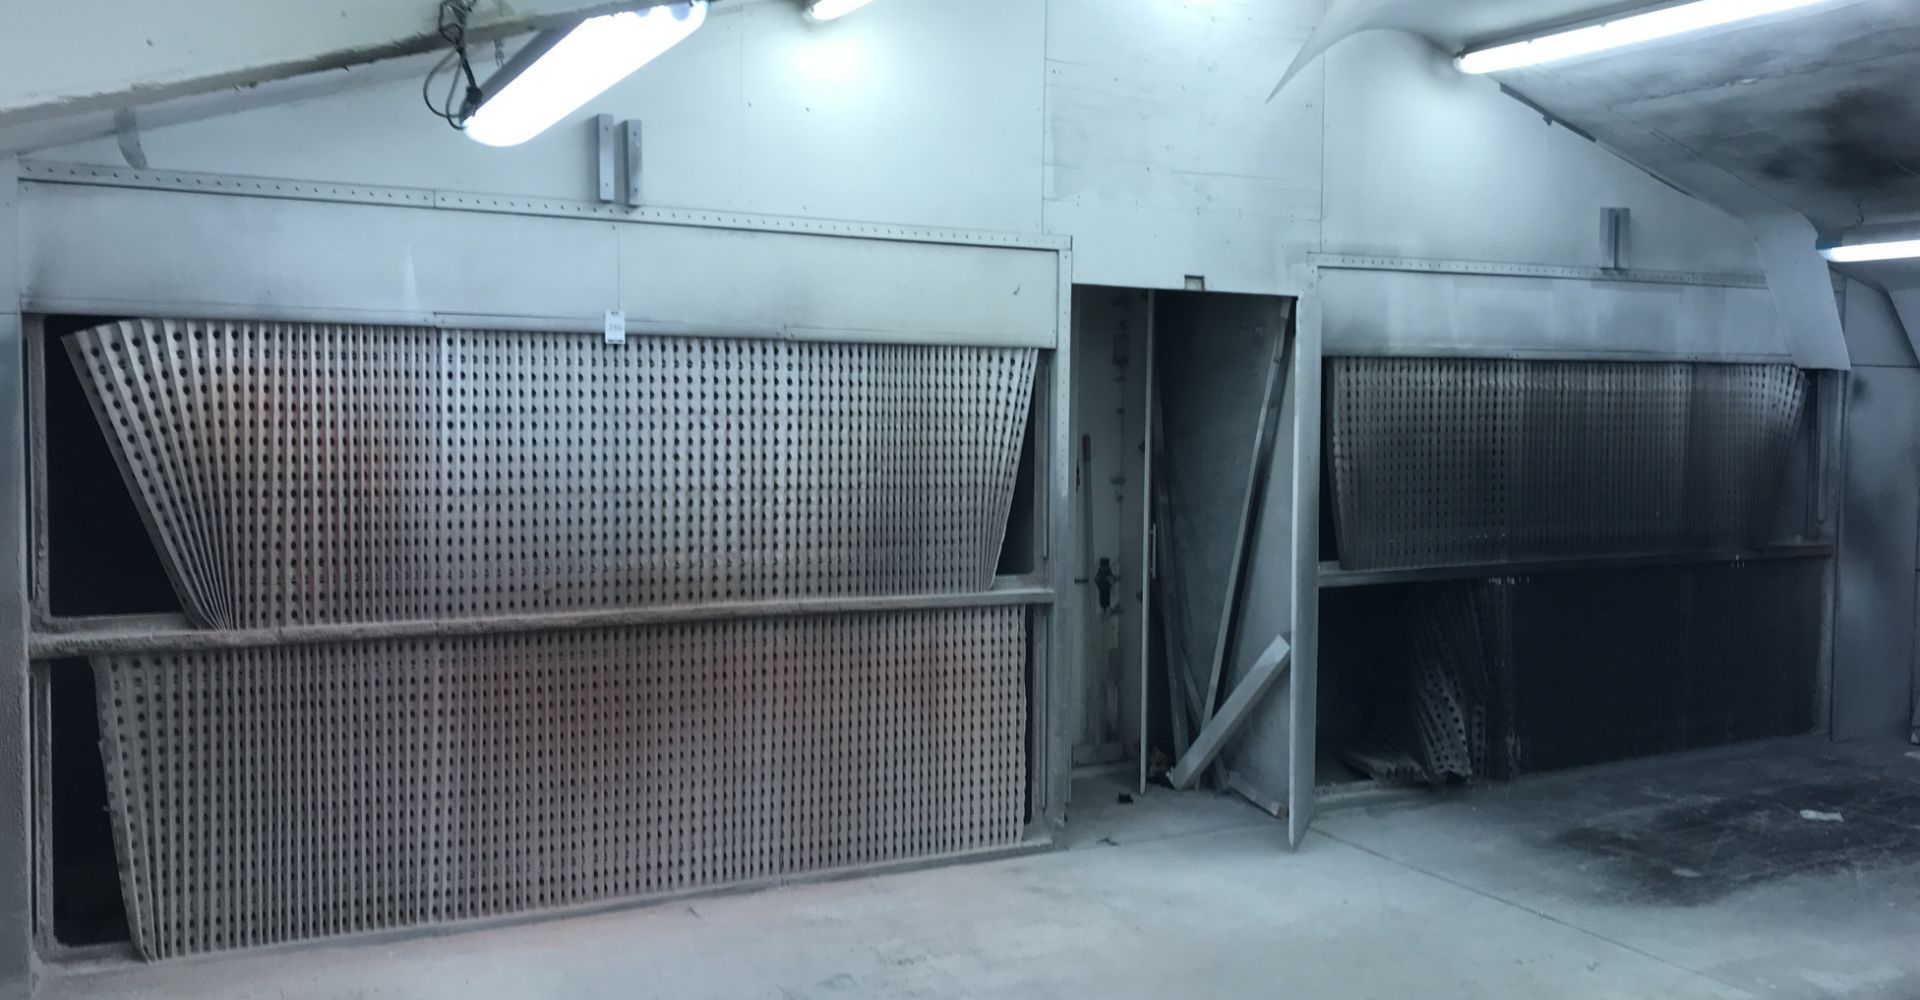 Twin Fercell Sectional Dryback Spray Booths (Purchaser to Dismantle - Must Provide RAMS, Copy of